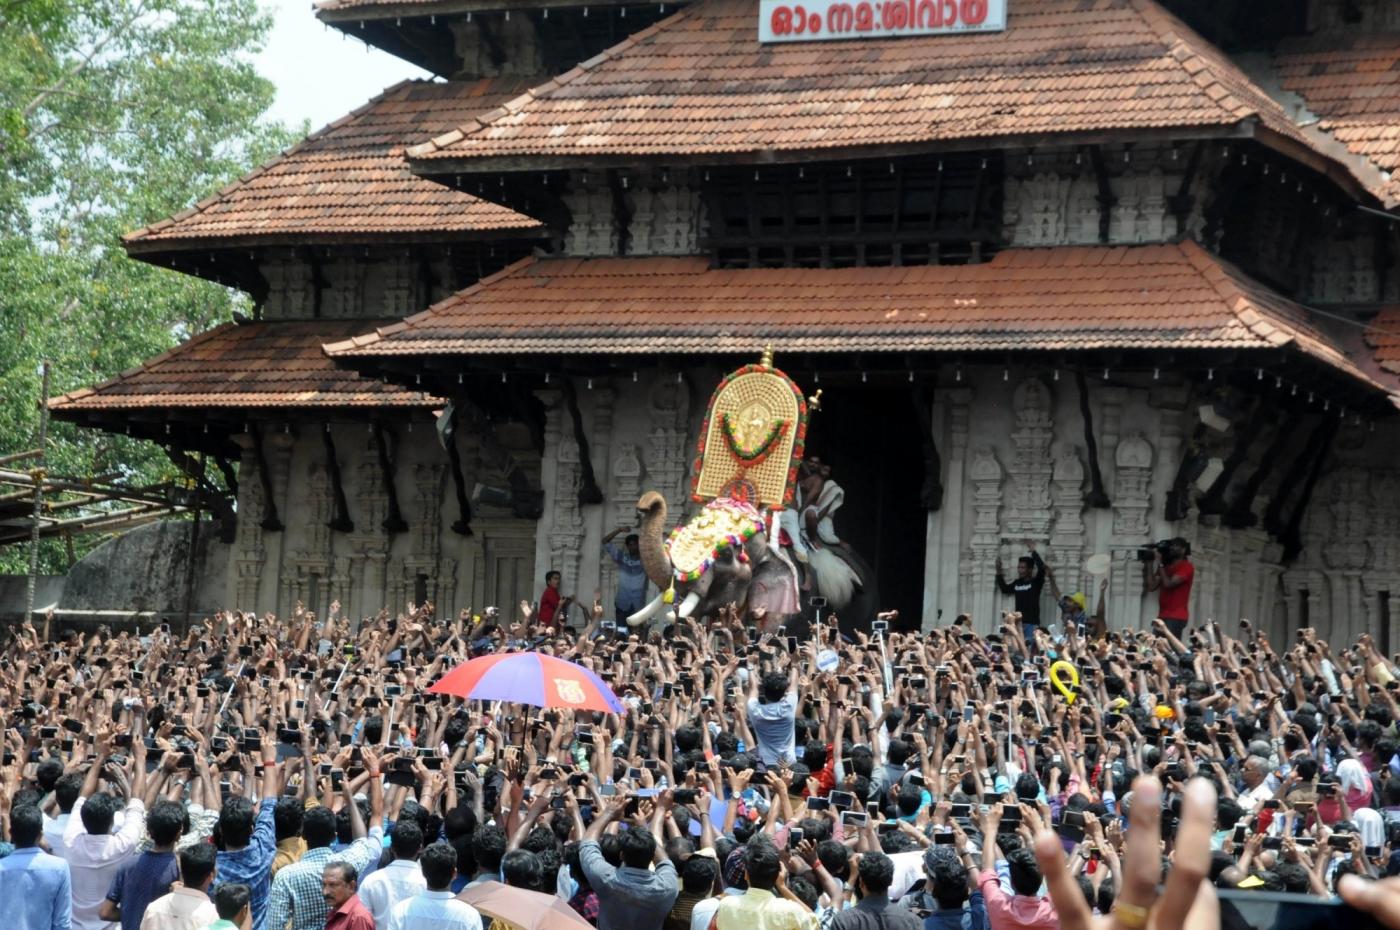 Thrissur: Elephant "Thechikottukavu Ramachandran" opens the door of the southern gopuram of the Vadakkumnathan temple to formally announce the beginning of the Thrissur Pooram in Kerala's Thrissur on May 4, 2017. (Photo: IANS) by .